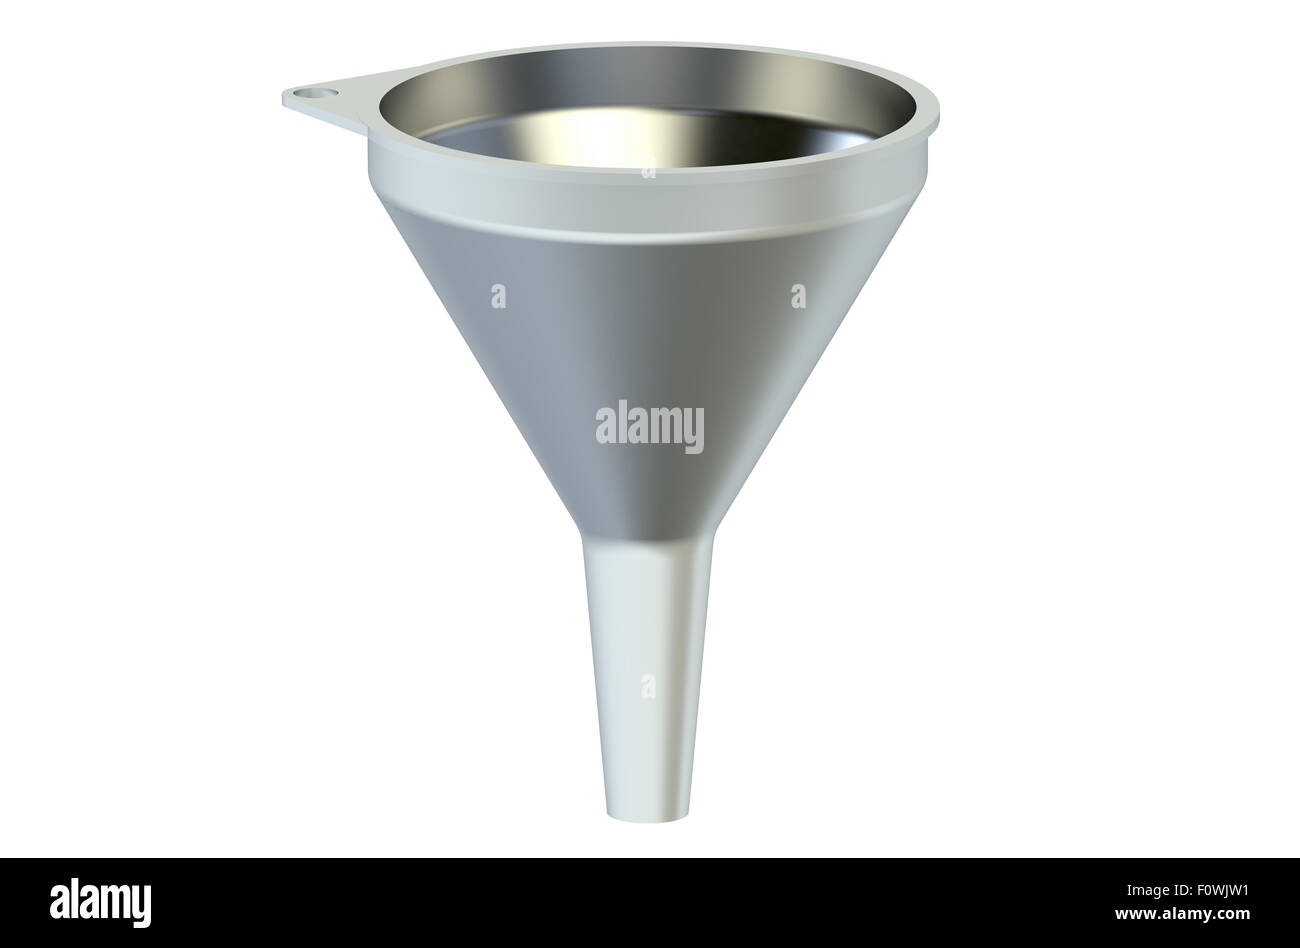 one metallic funnel isolated on white background Stock Photo